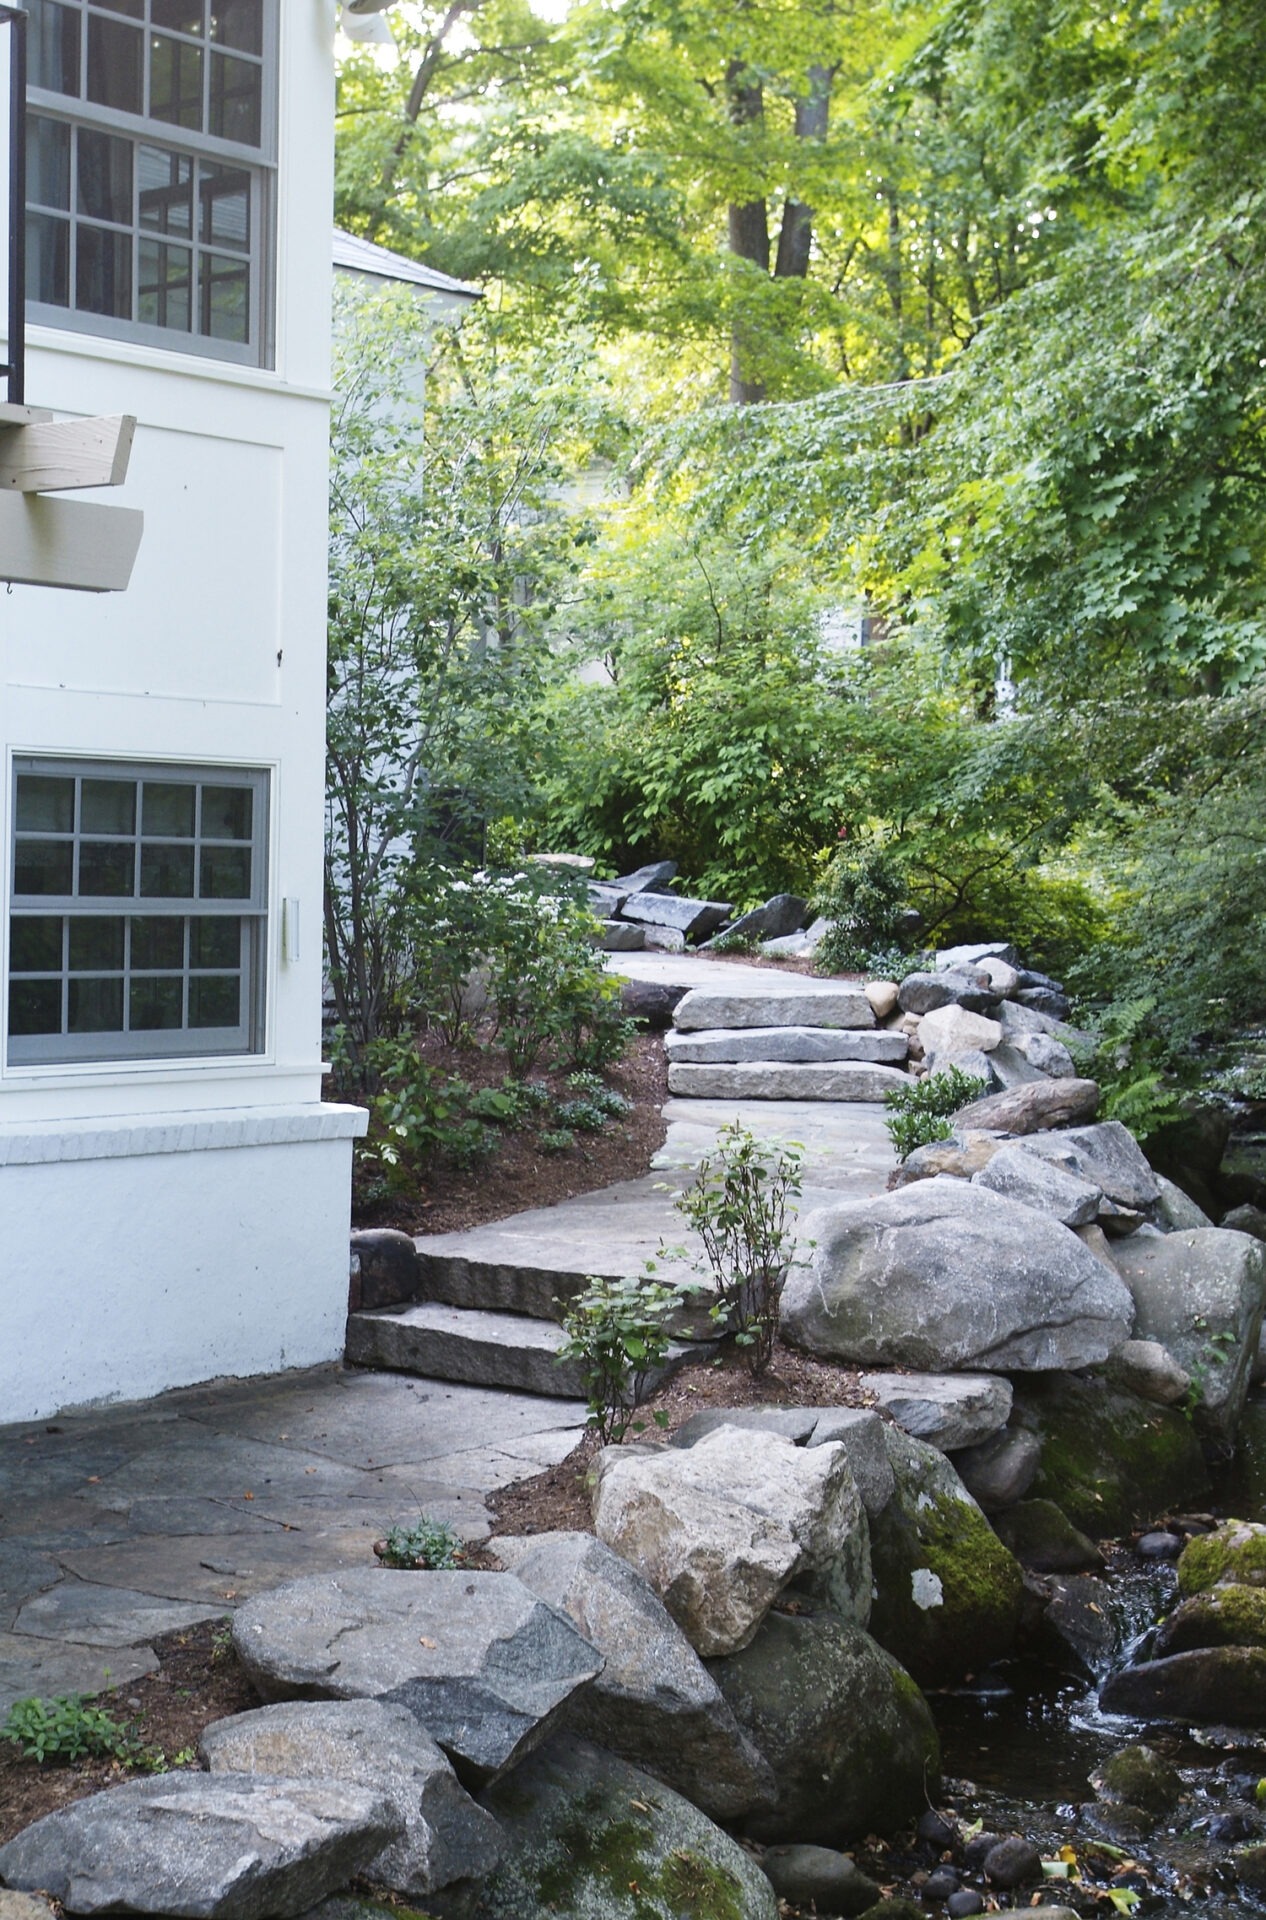 A serene garden path with large stepping stones leads past a small stream, adjacent to a white building with windows, amidst lush greenery.